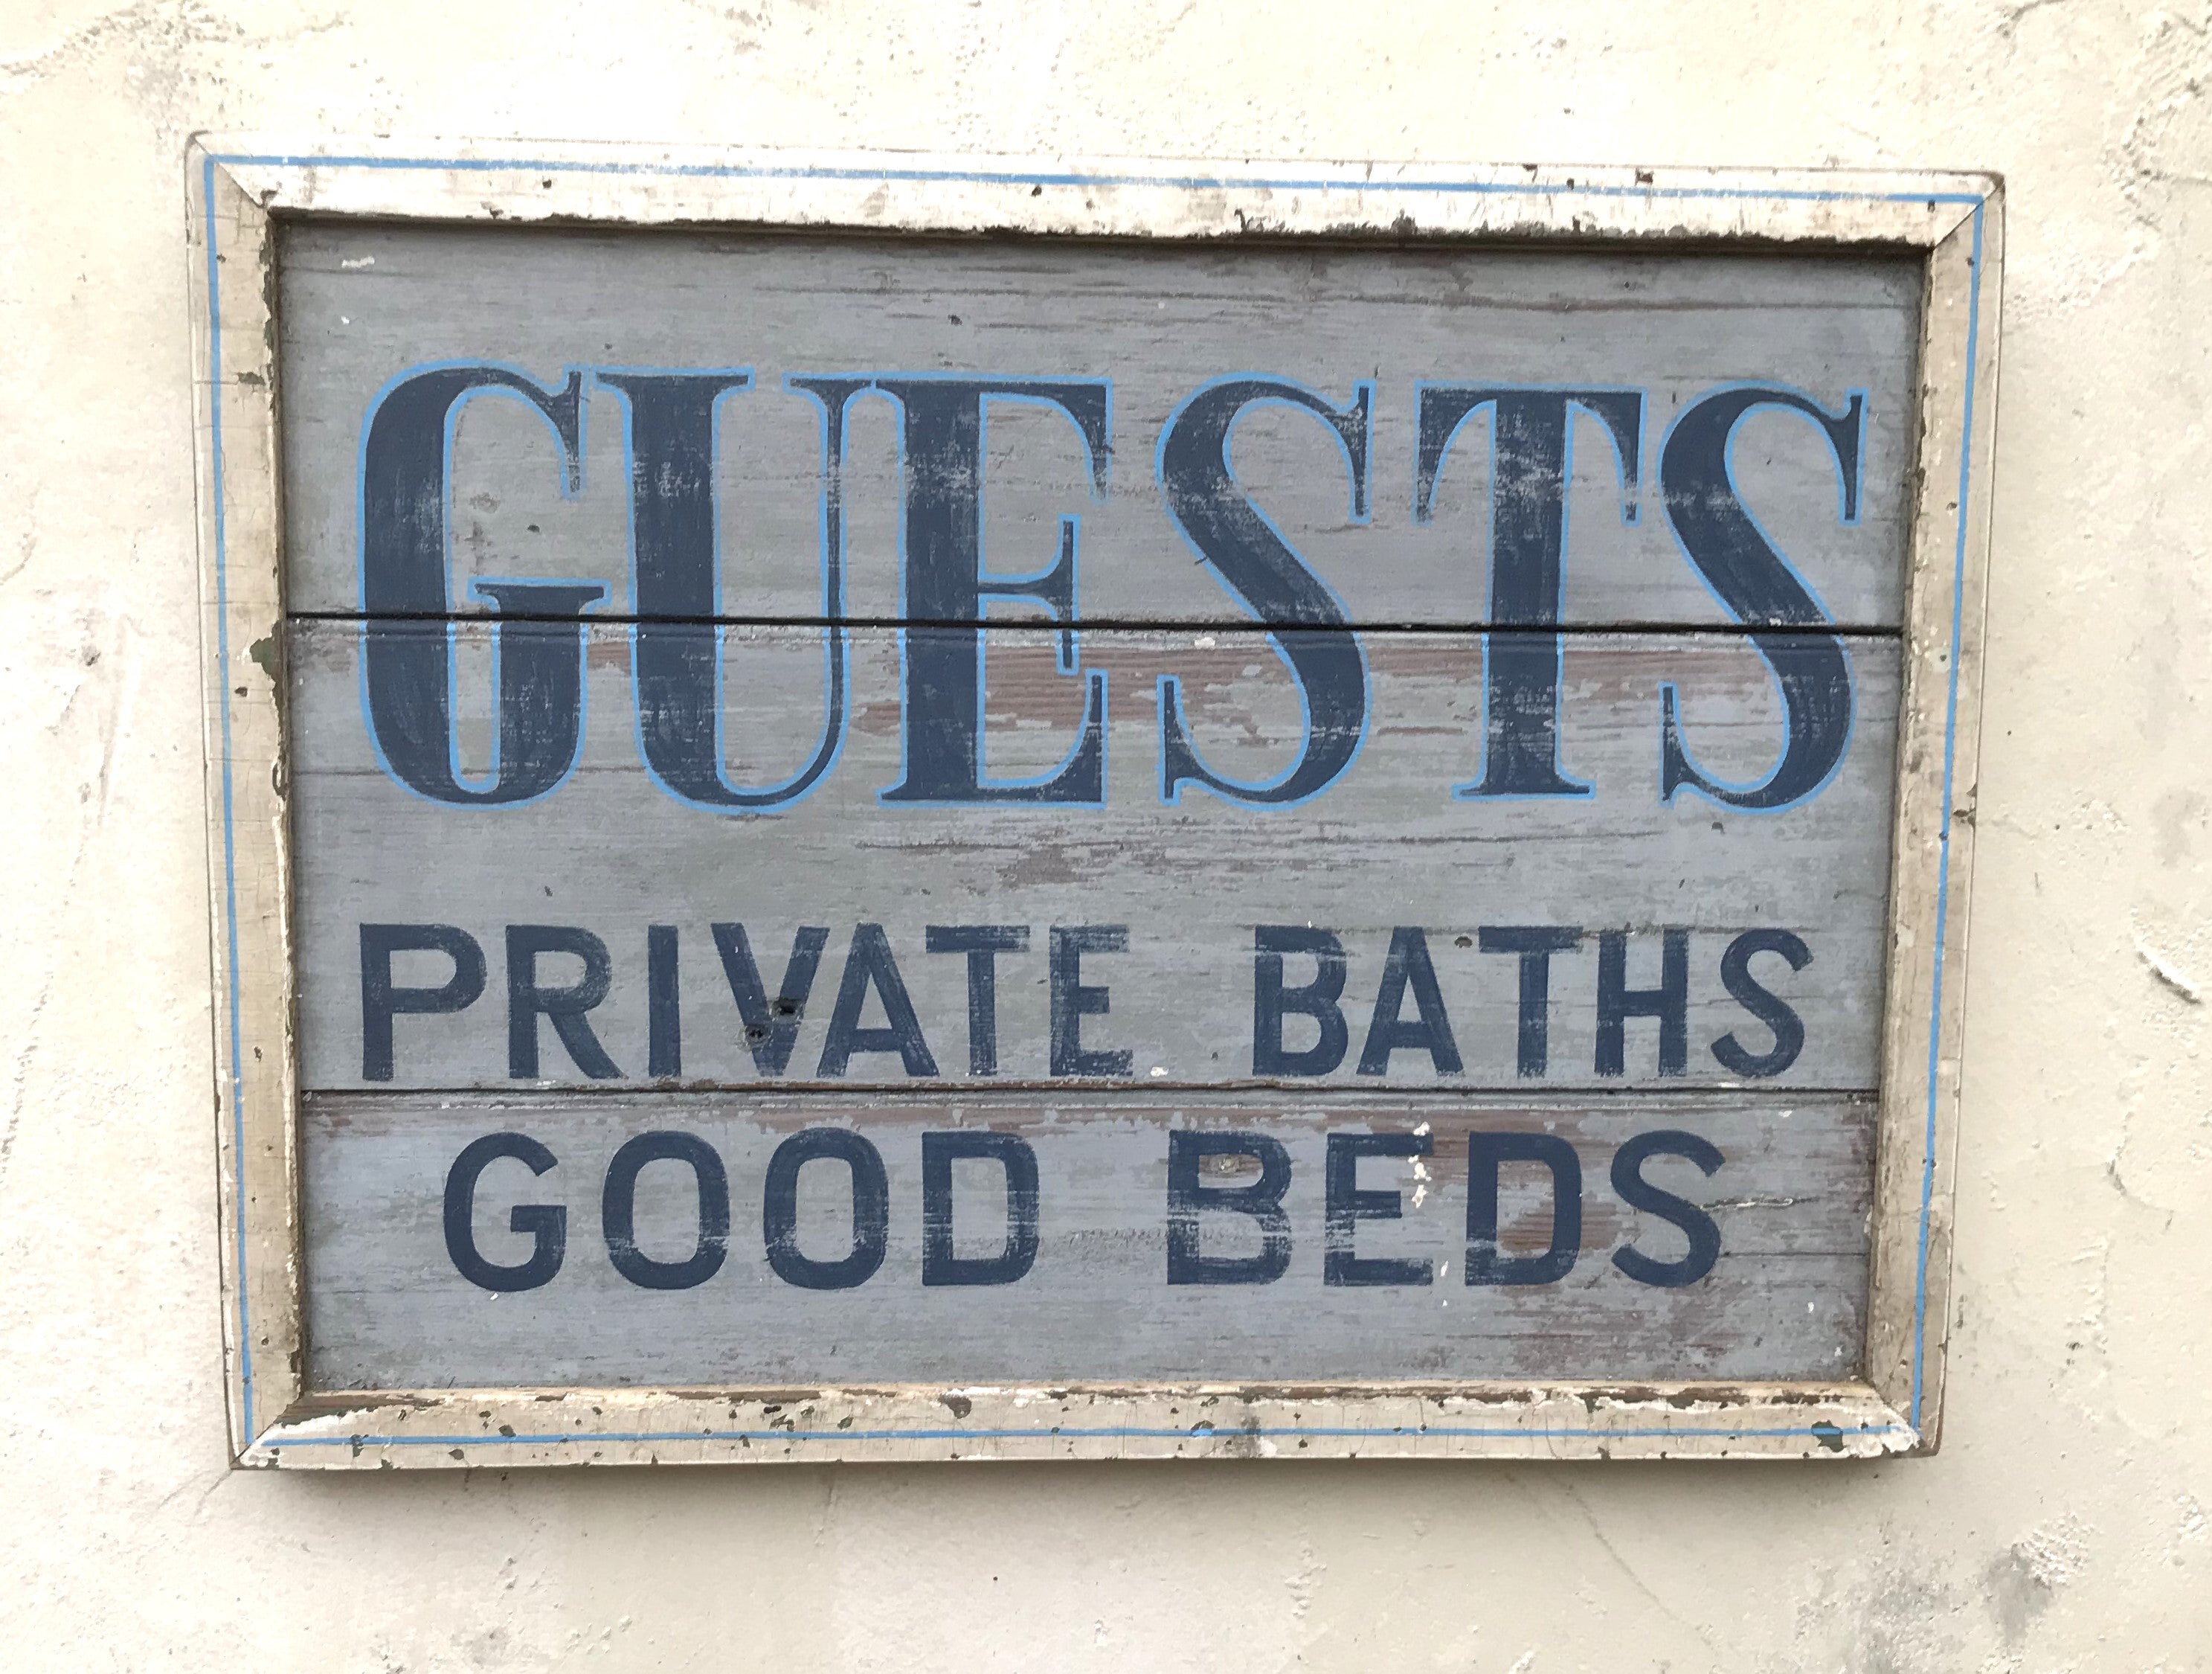 Guests -Private Baths Good Beds